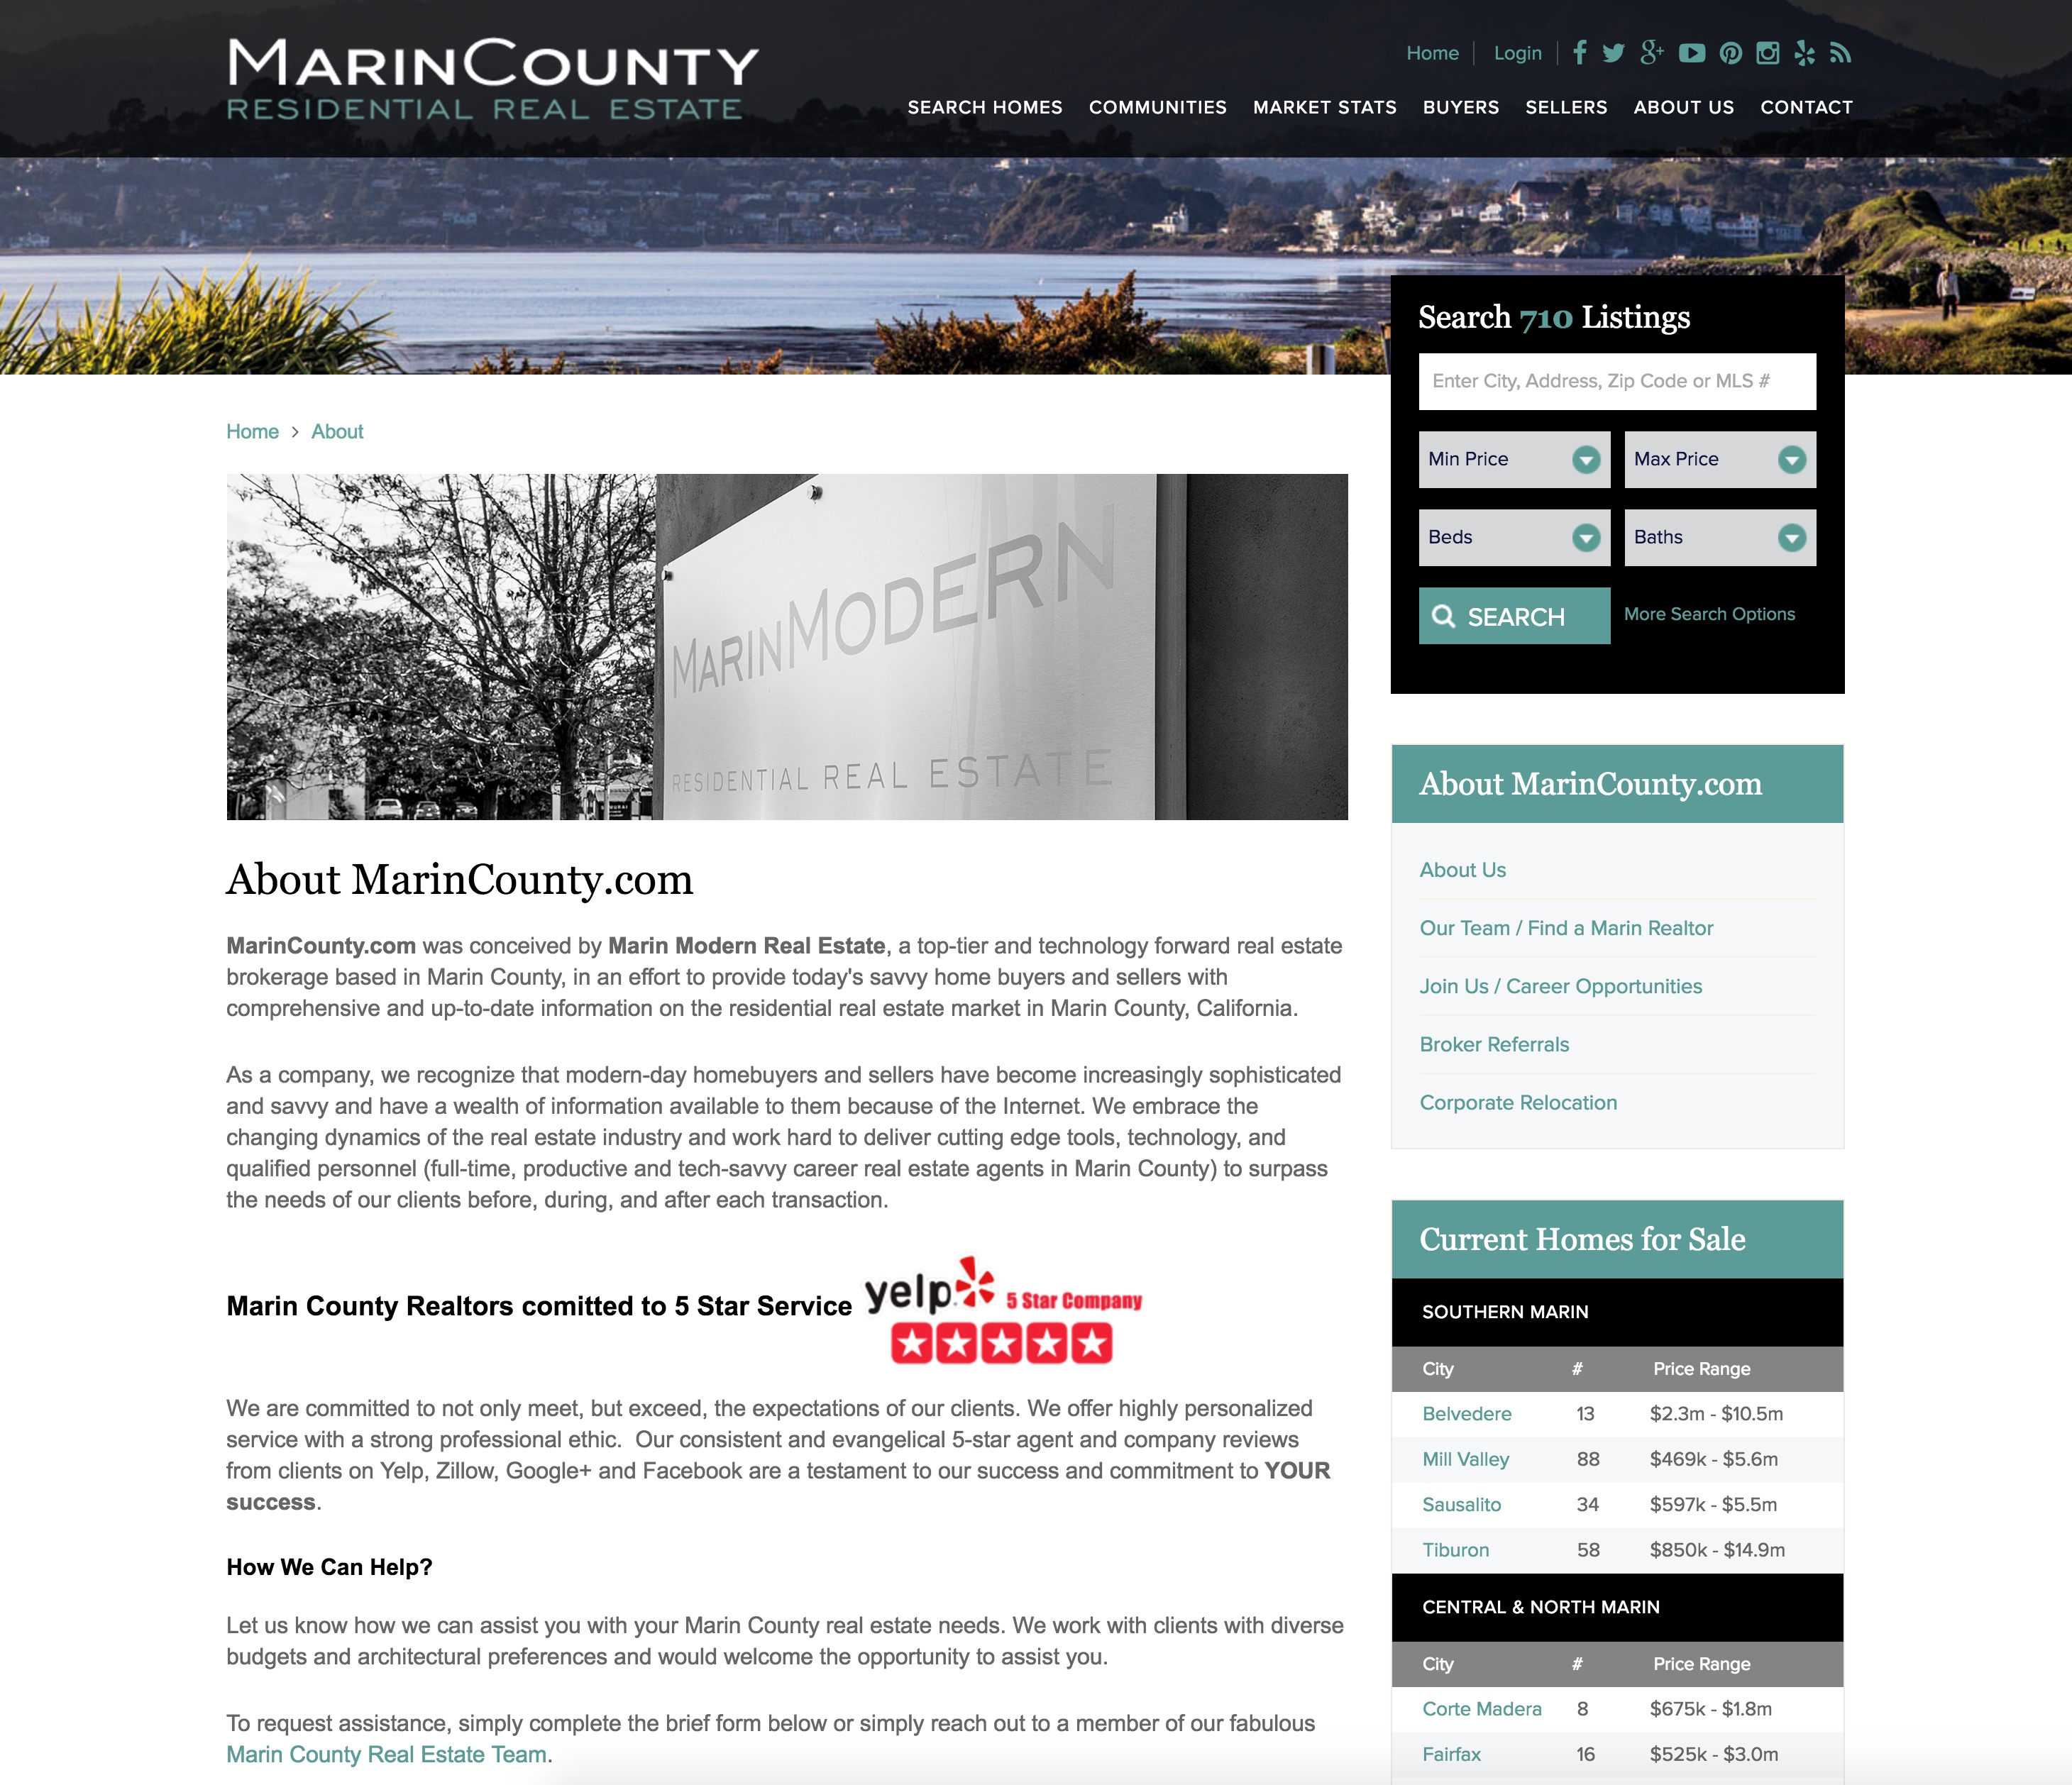 About MarinCounty.com